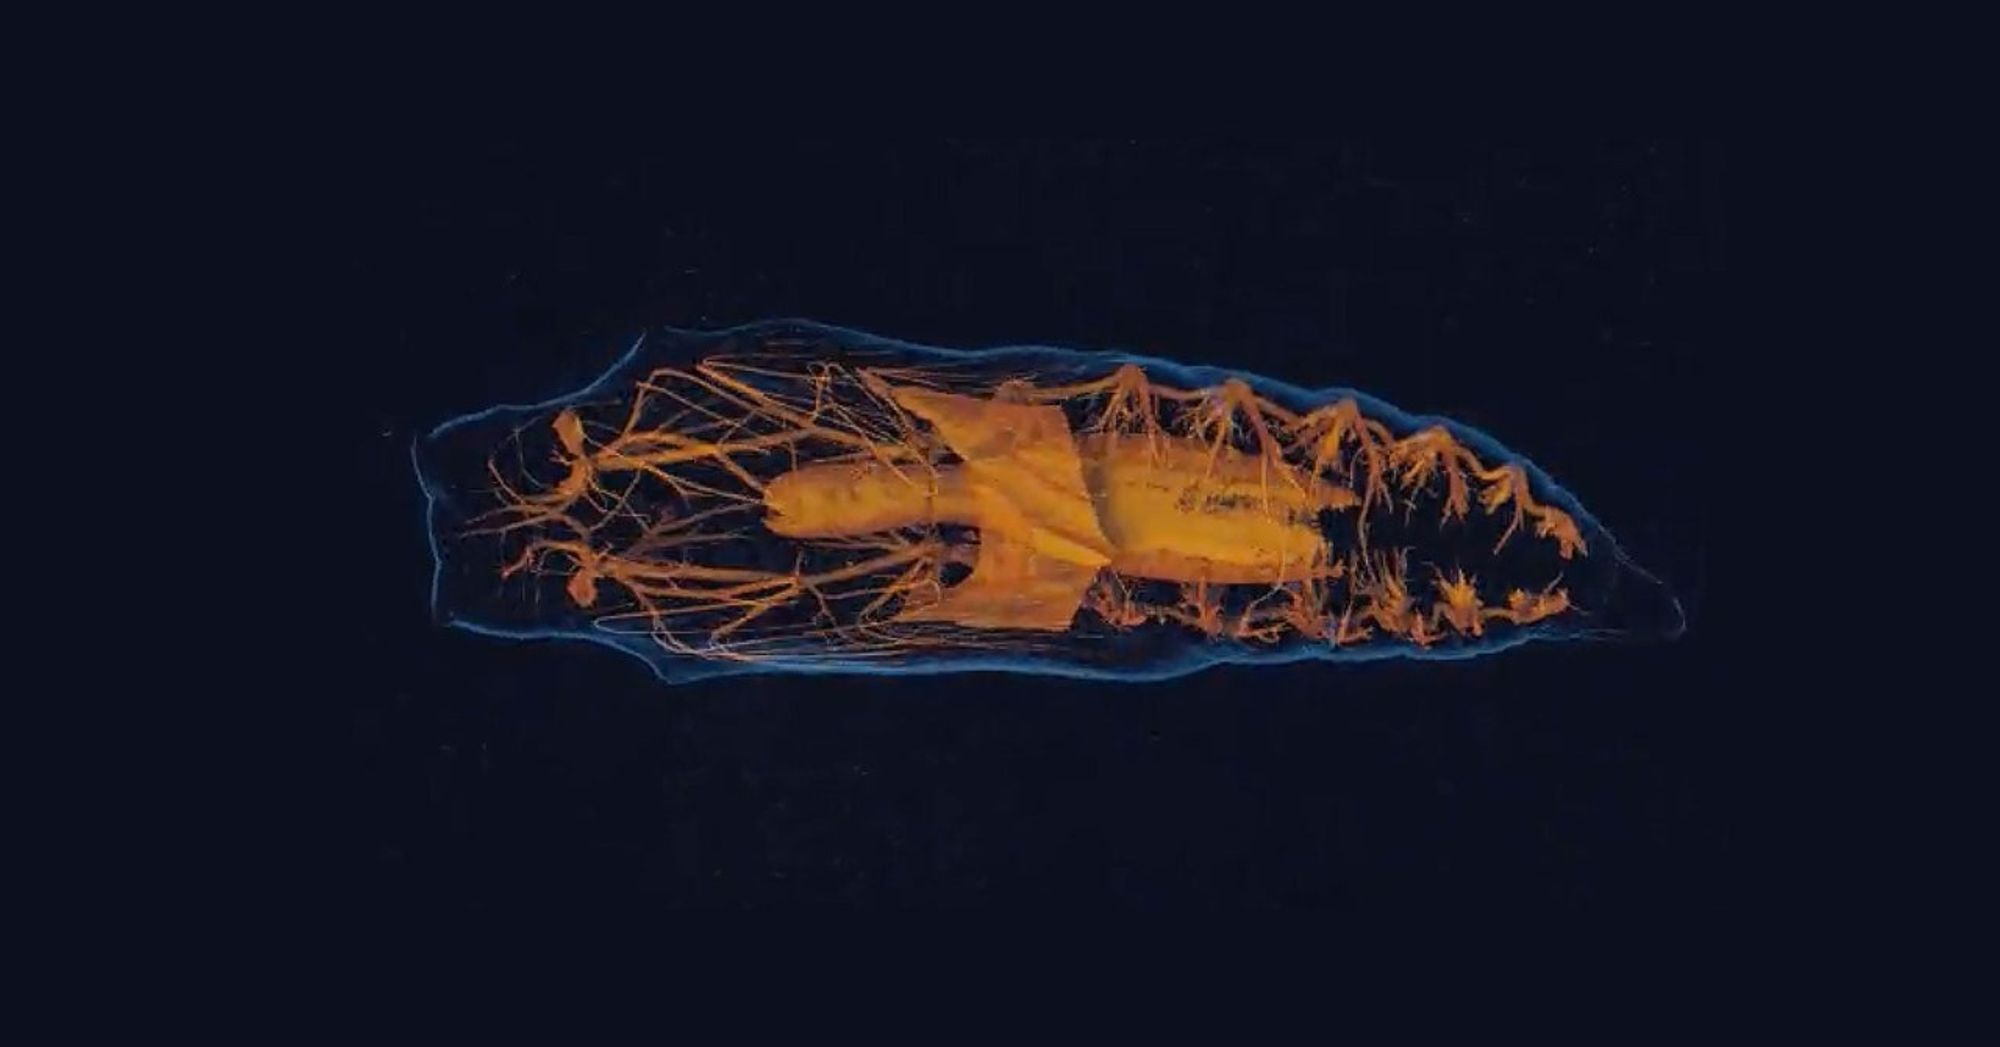 How Insect Brains Melt and Rewire During Metamorphosis | WIRED